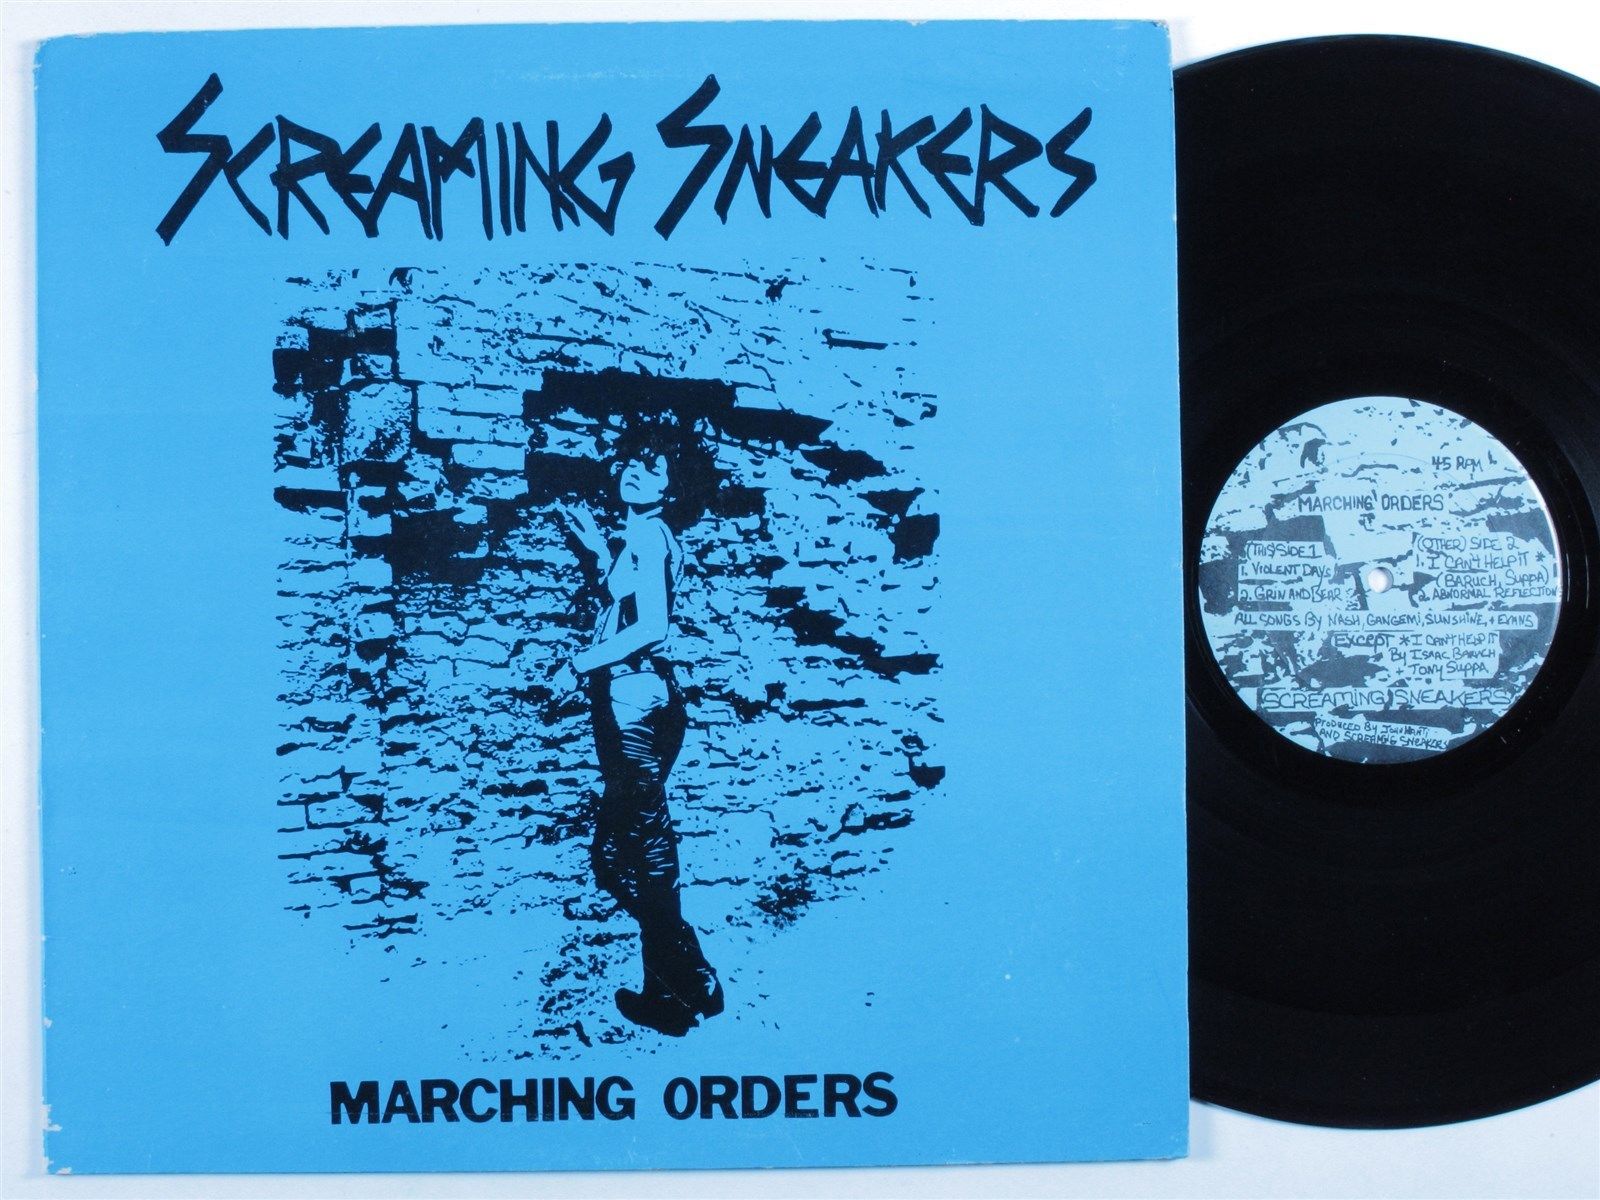 popsike.com - SCREAMING SNEAKERS Marching Orders SCREAMING SNEAKERS EP VG+  45 rpm - auction details